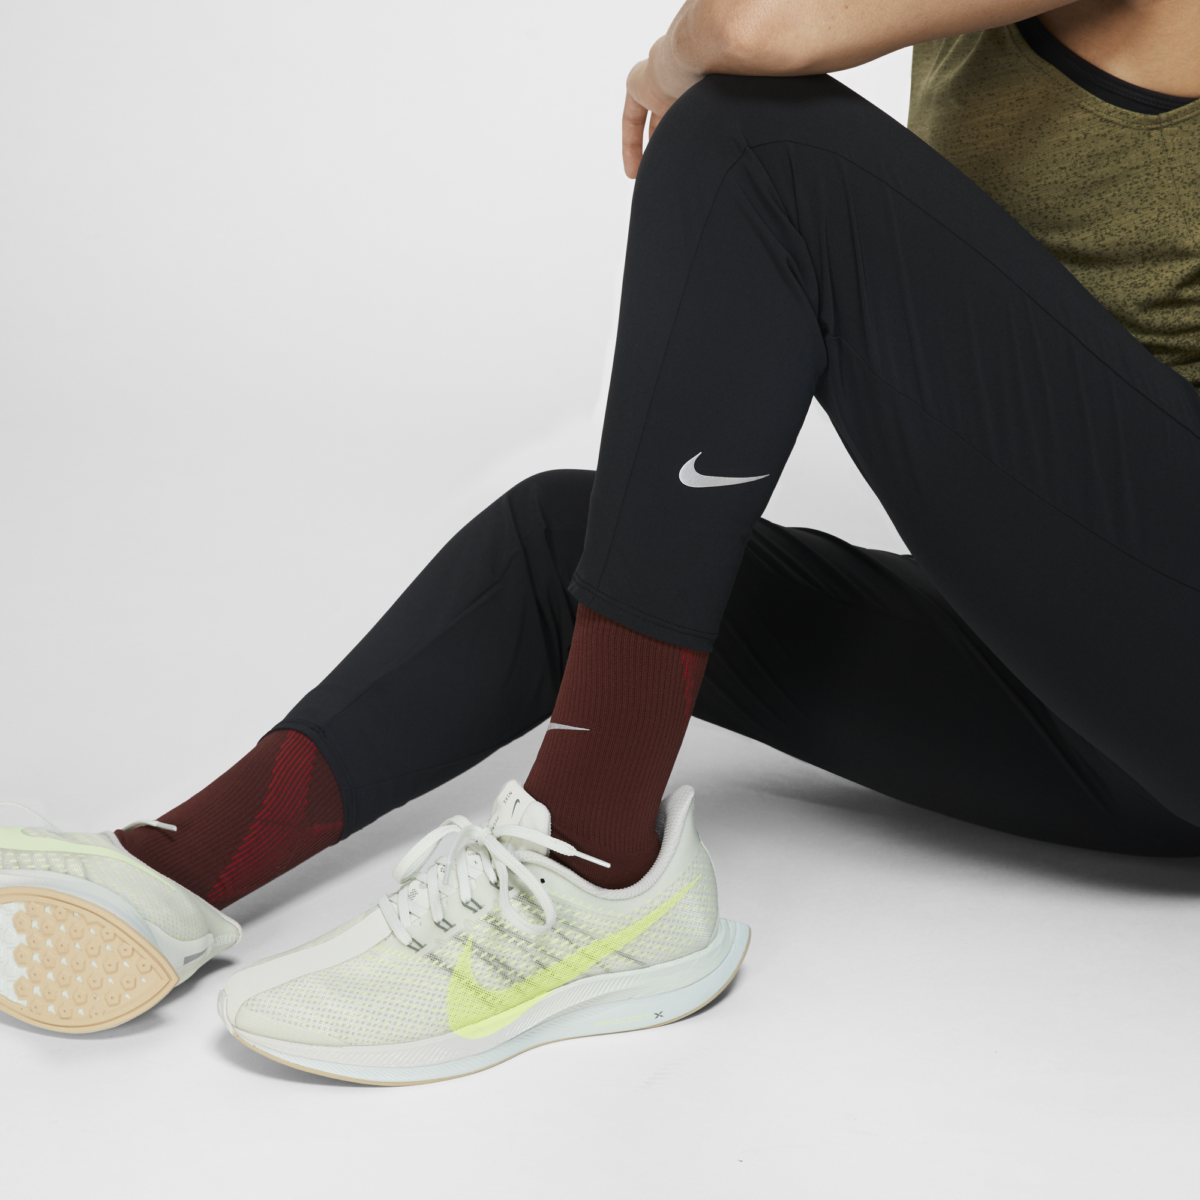 saleshop.irq, Running Trousers Nike Essential BV2898-011 XS_S_M_L_XL_XXL  The Nike Essential Women's 7/8 Running Trousers feature stretchy  sweat-wicki